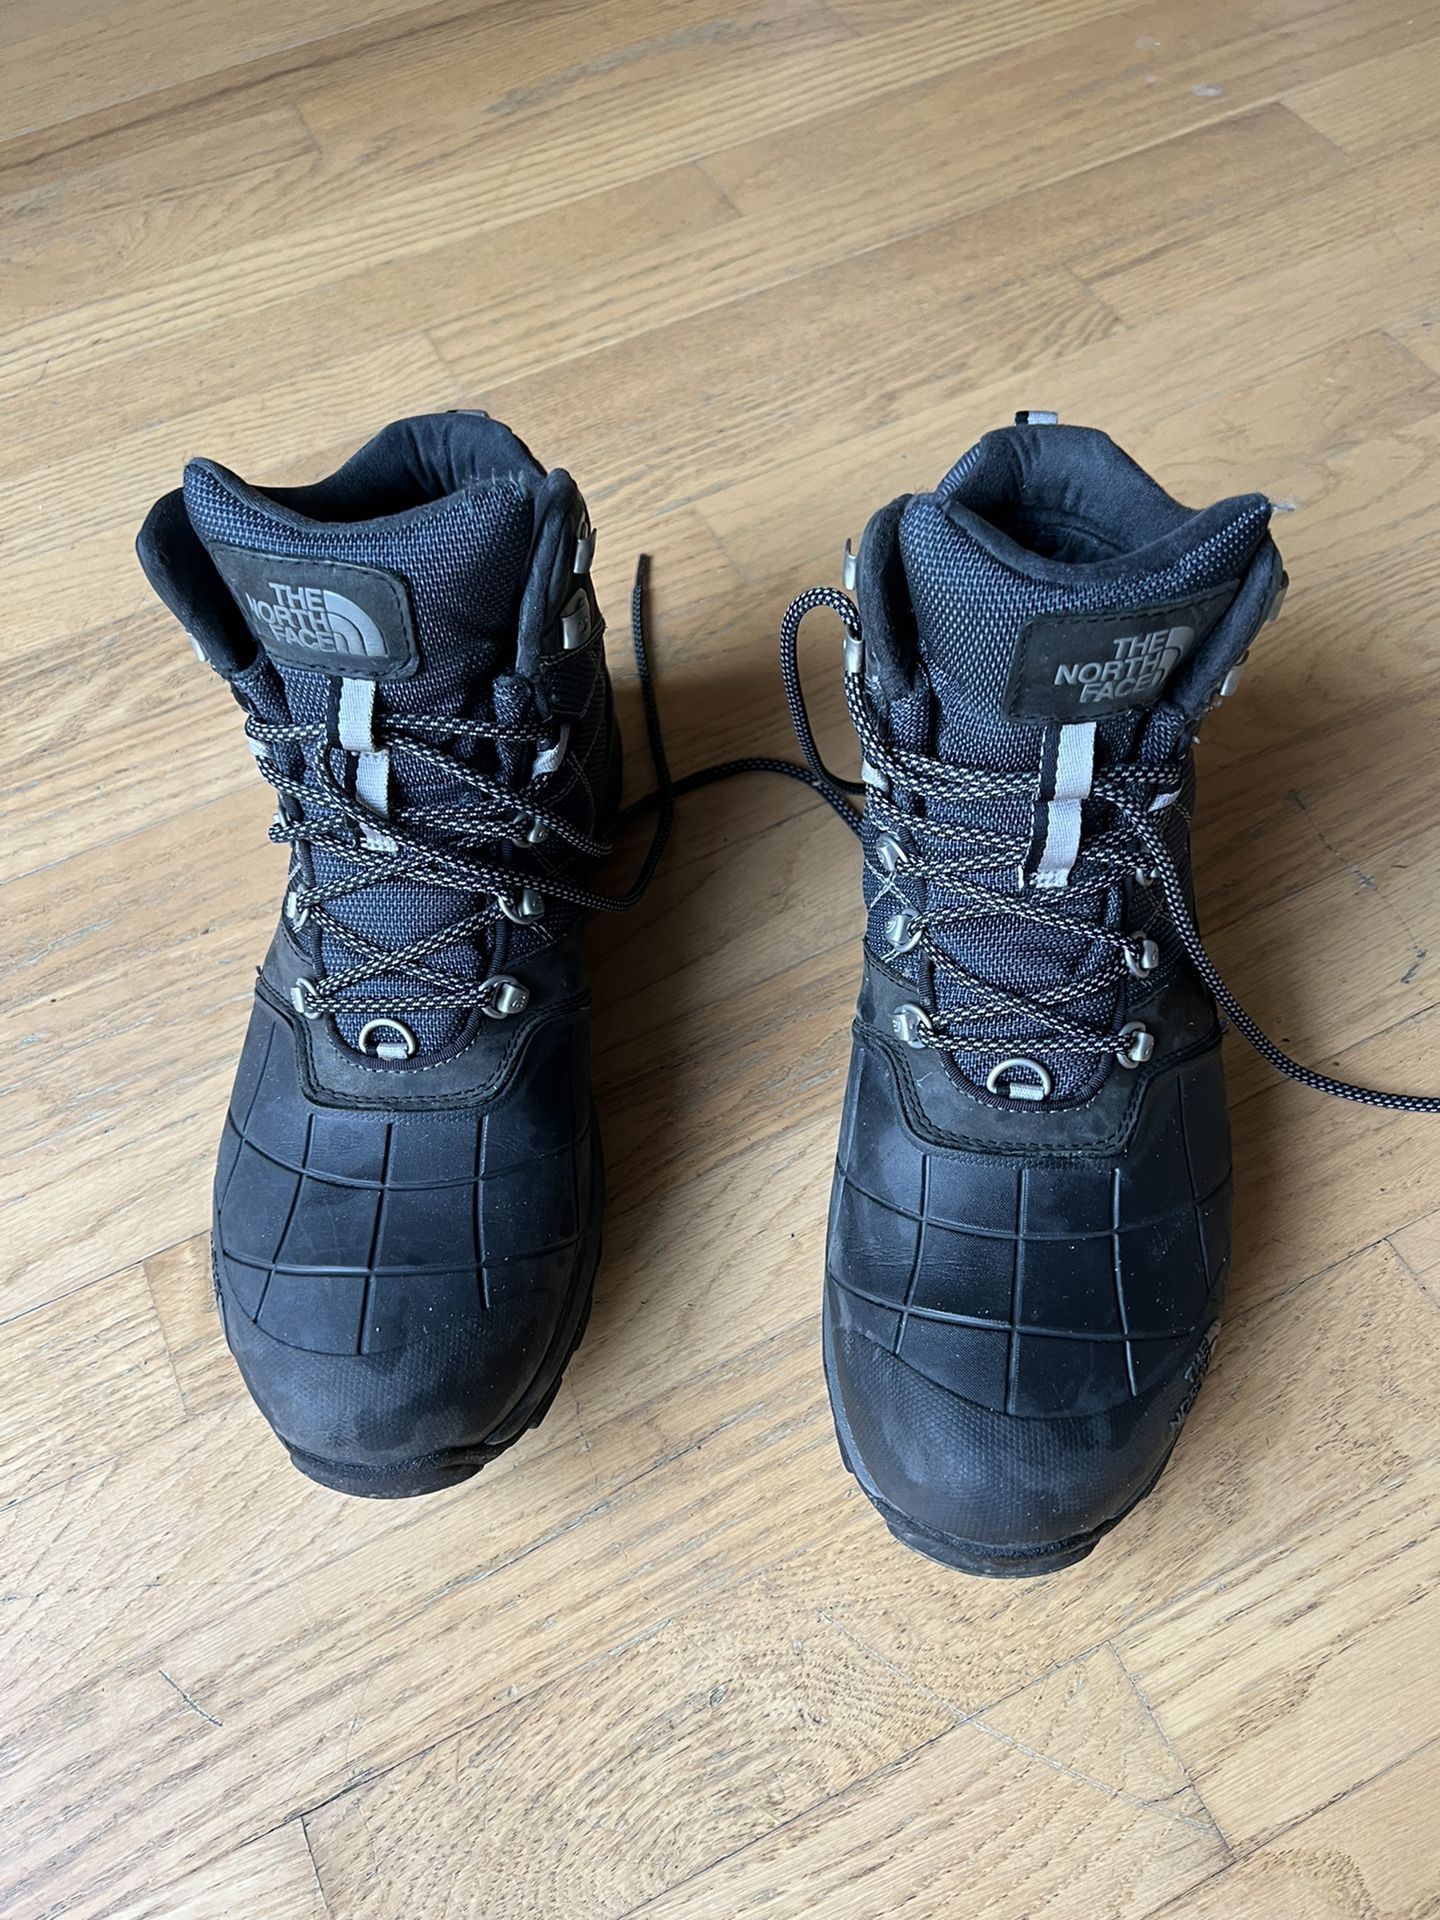 The North Face Boots - Waterproof, Mens Size 11 